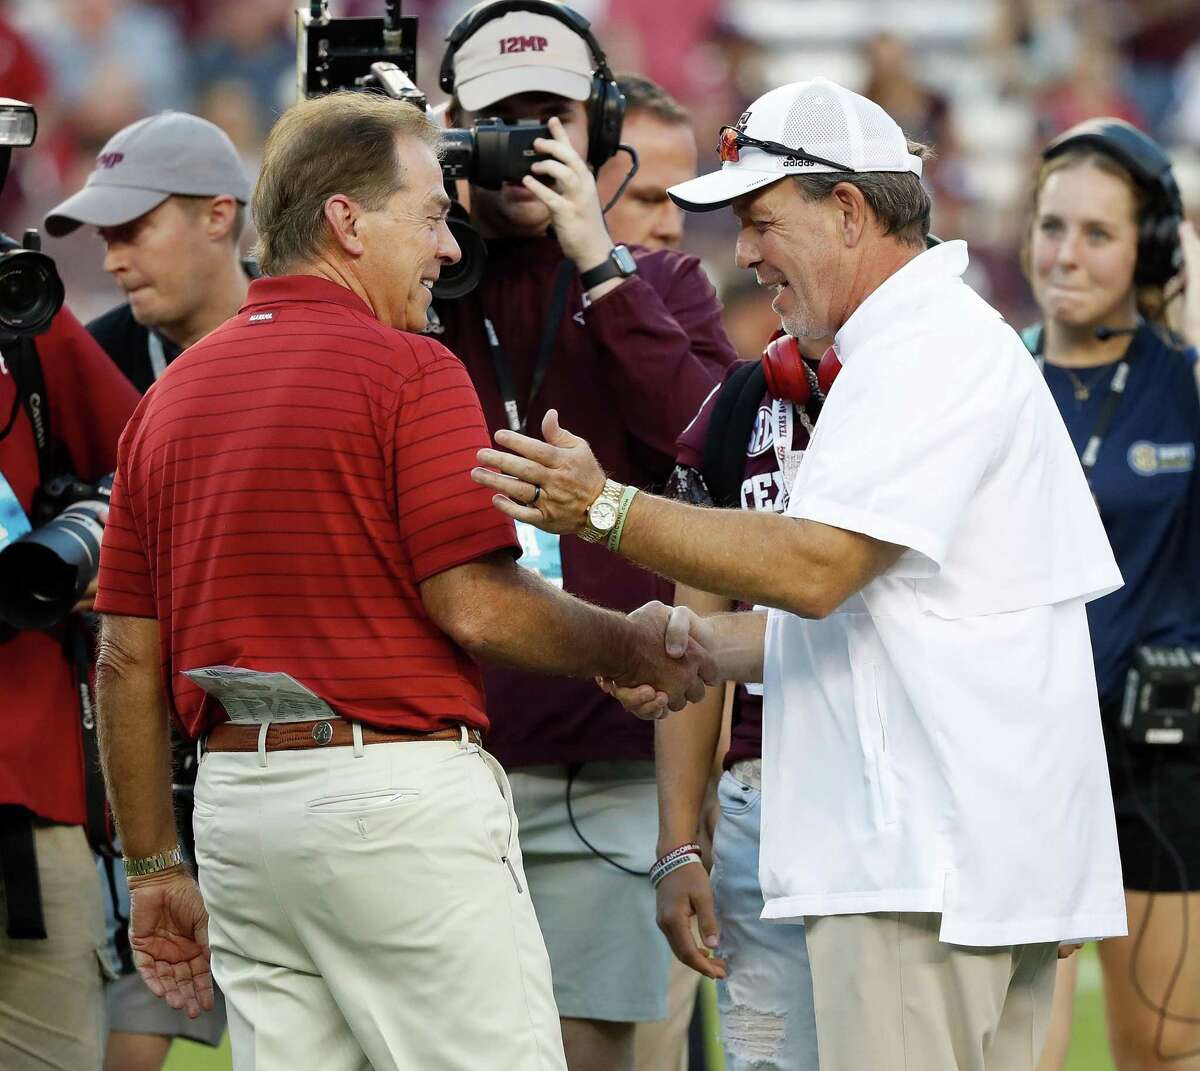 Coach Nick Saban of the Alabama Crimson Tide and coach Jimbo Fisher of the Texas A&M Aggies meet before the game at Kyle Field on Oct. 9, 2021 in College Station.